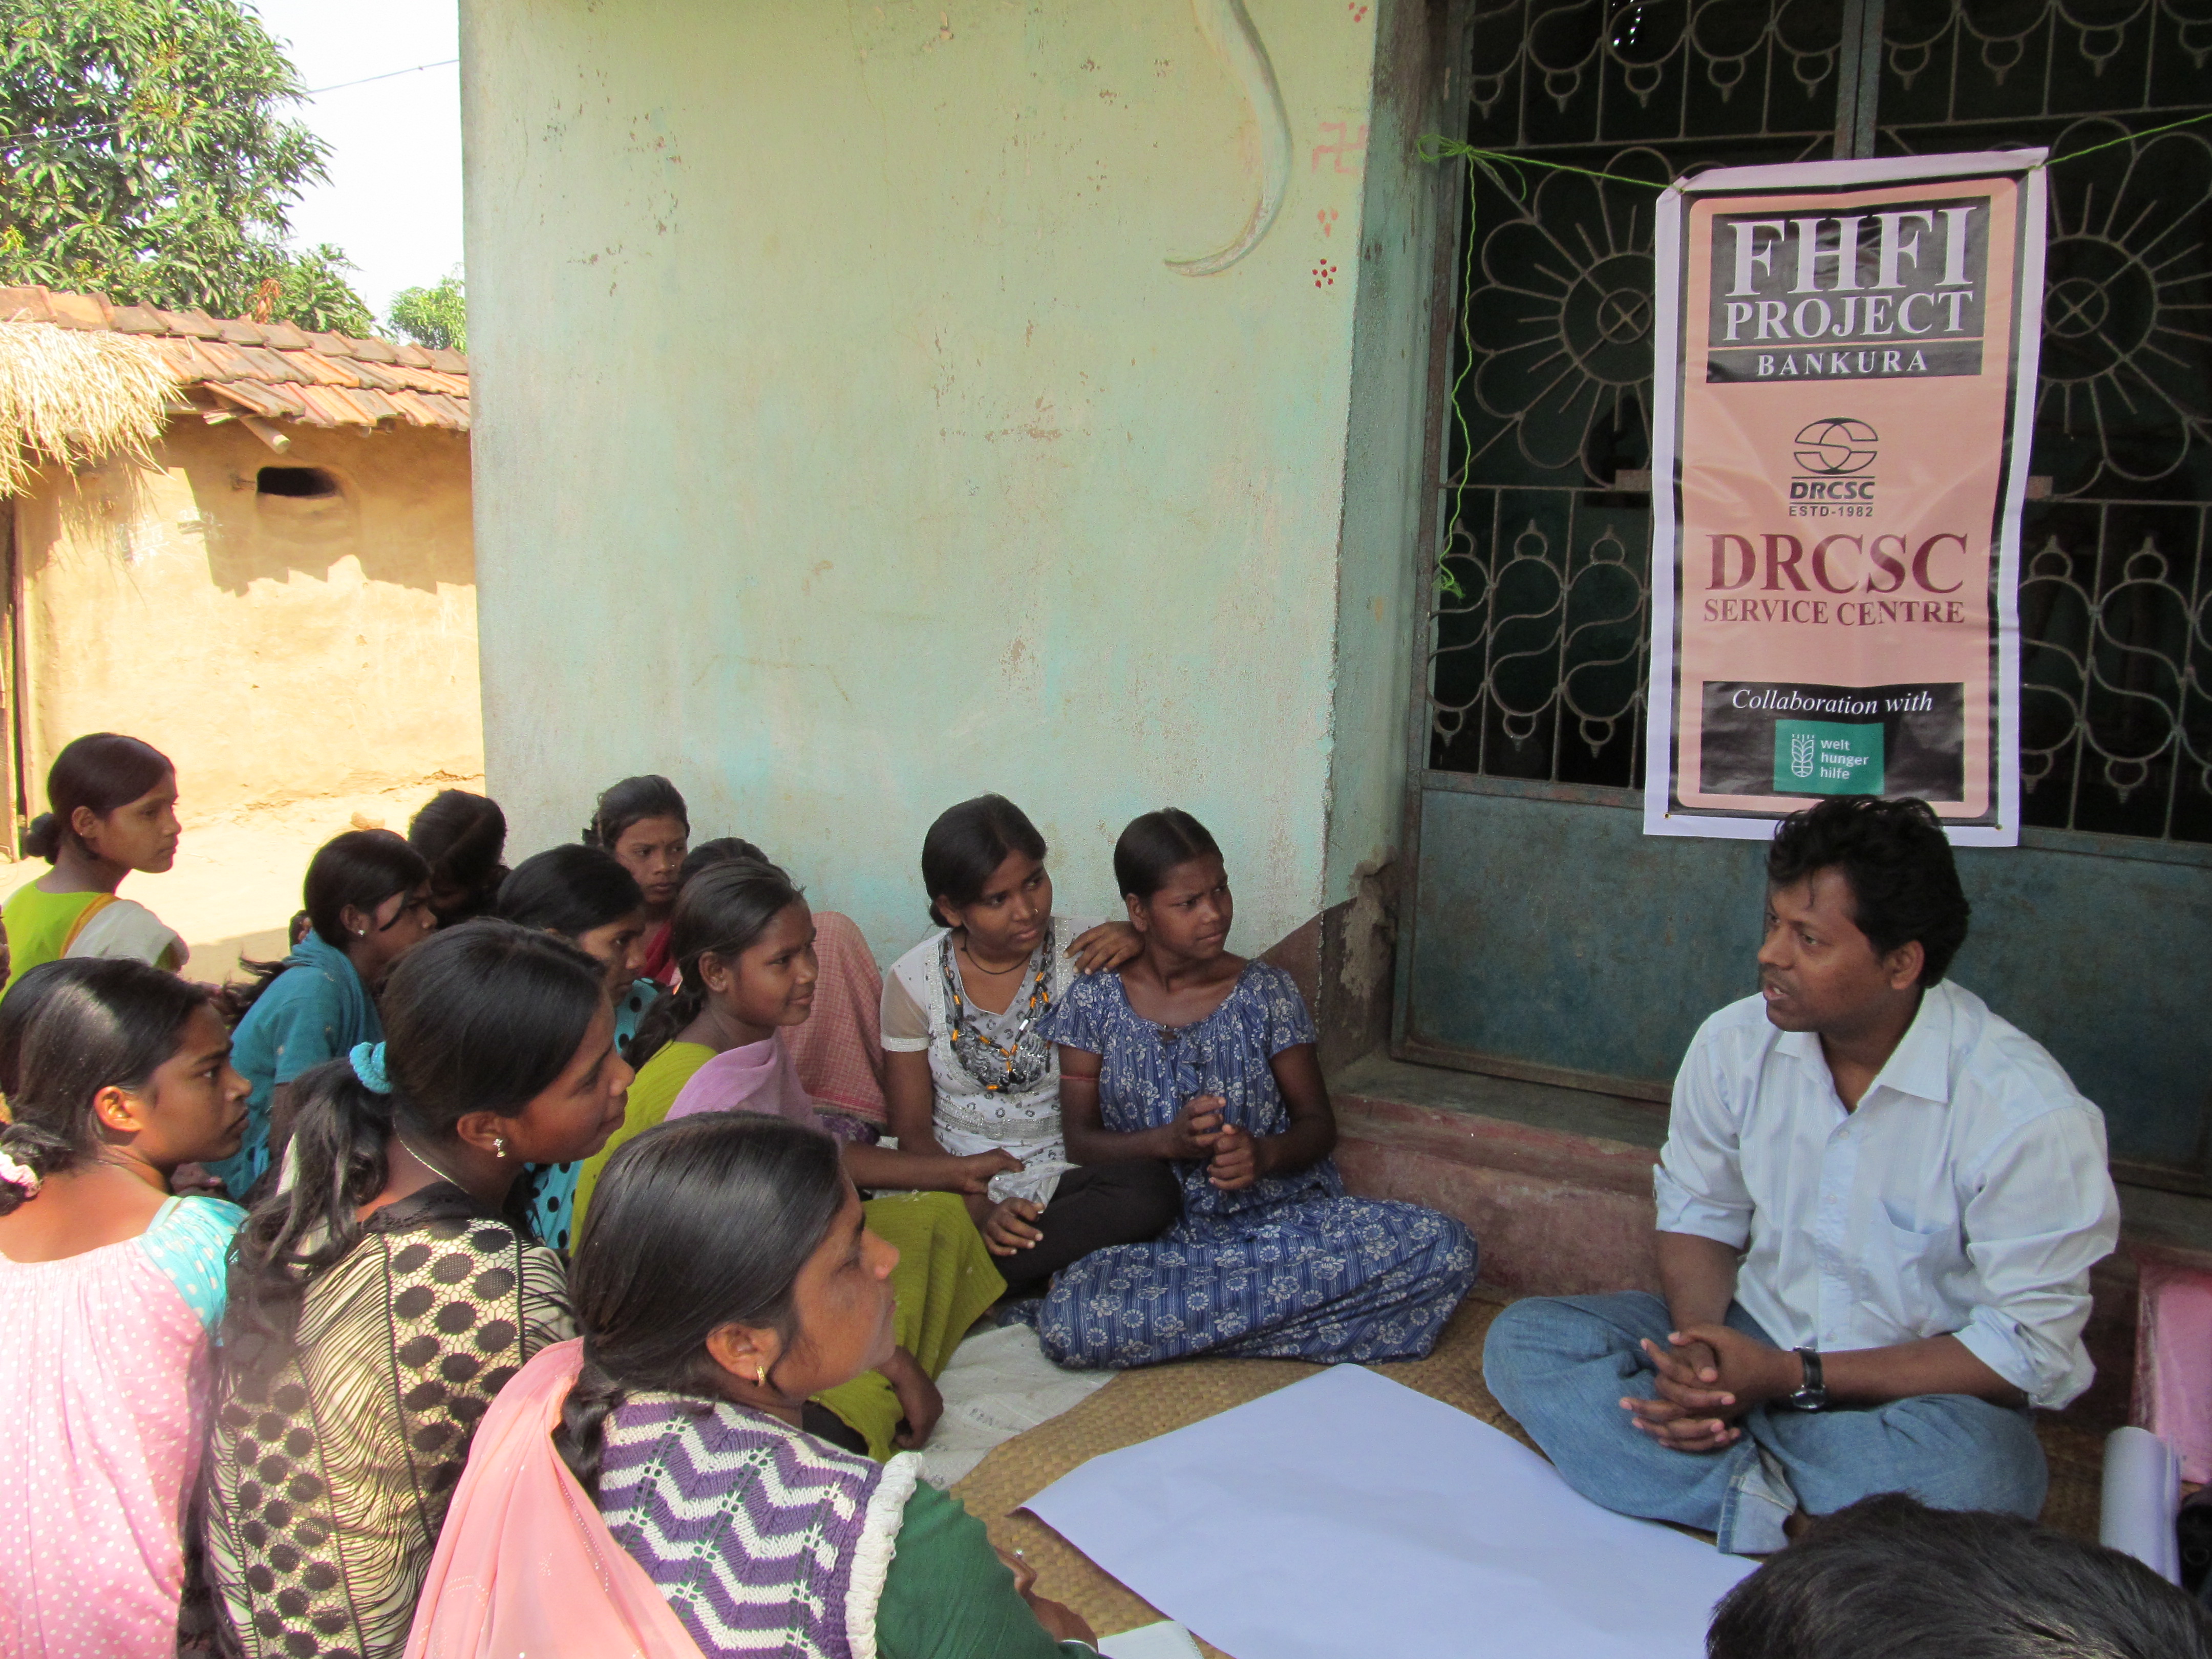 Youngsters in 32 villages of Ghoshergram and Jhunjkagram panchayats in Bankura district of West Bengal have formed groups that spread awareness on issues related to health, education and development. (Credit: DRCSC\WFS)